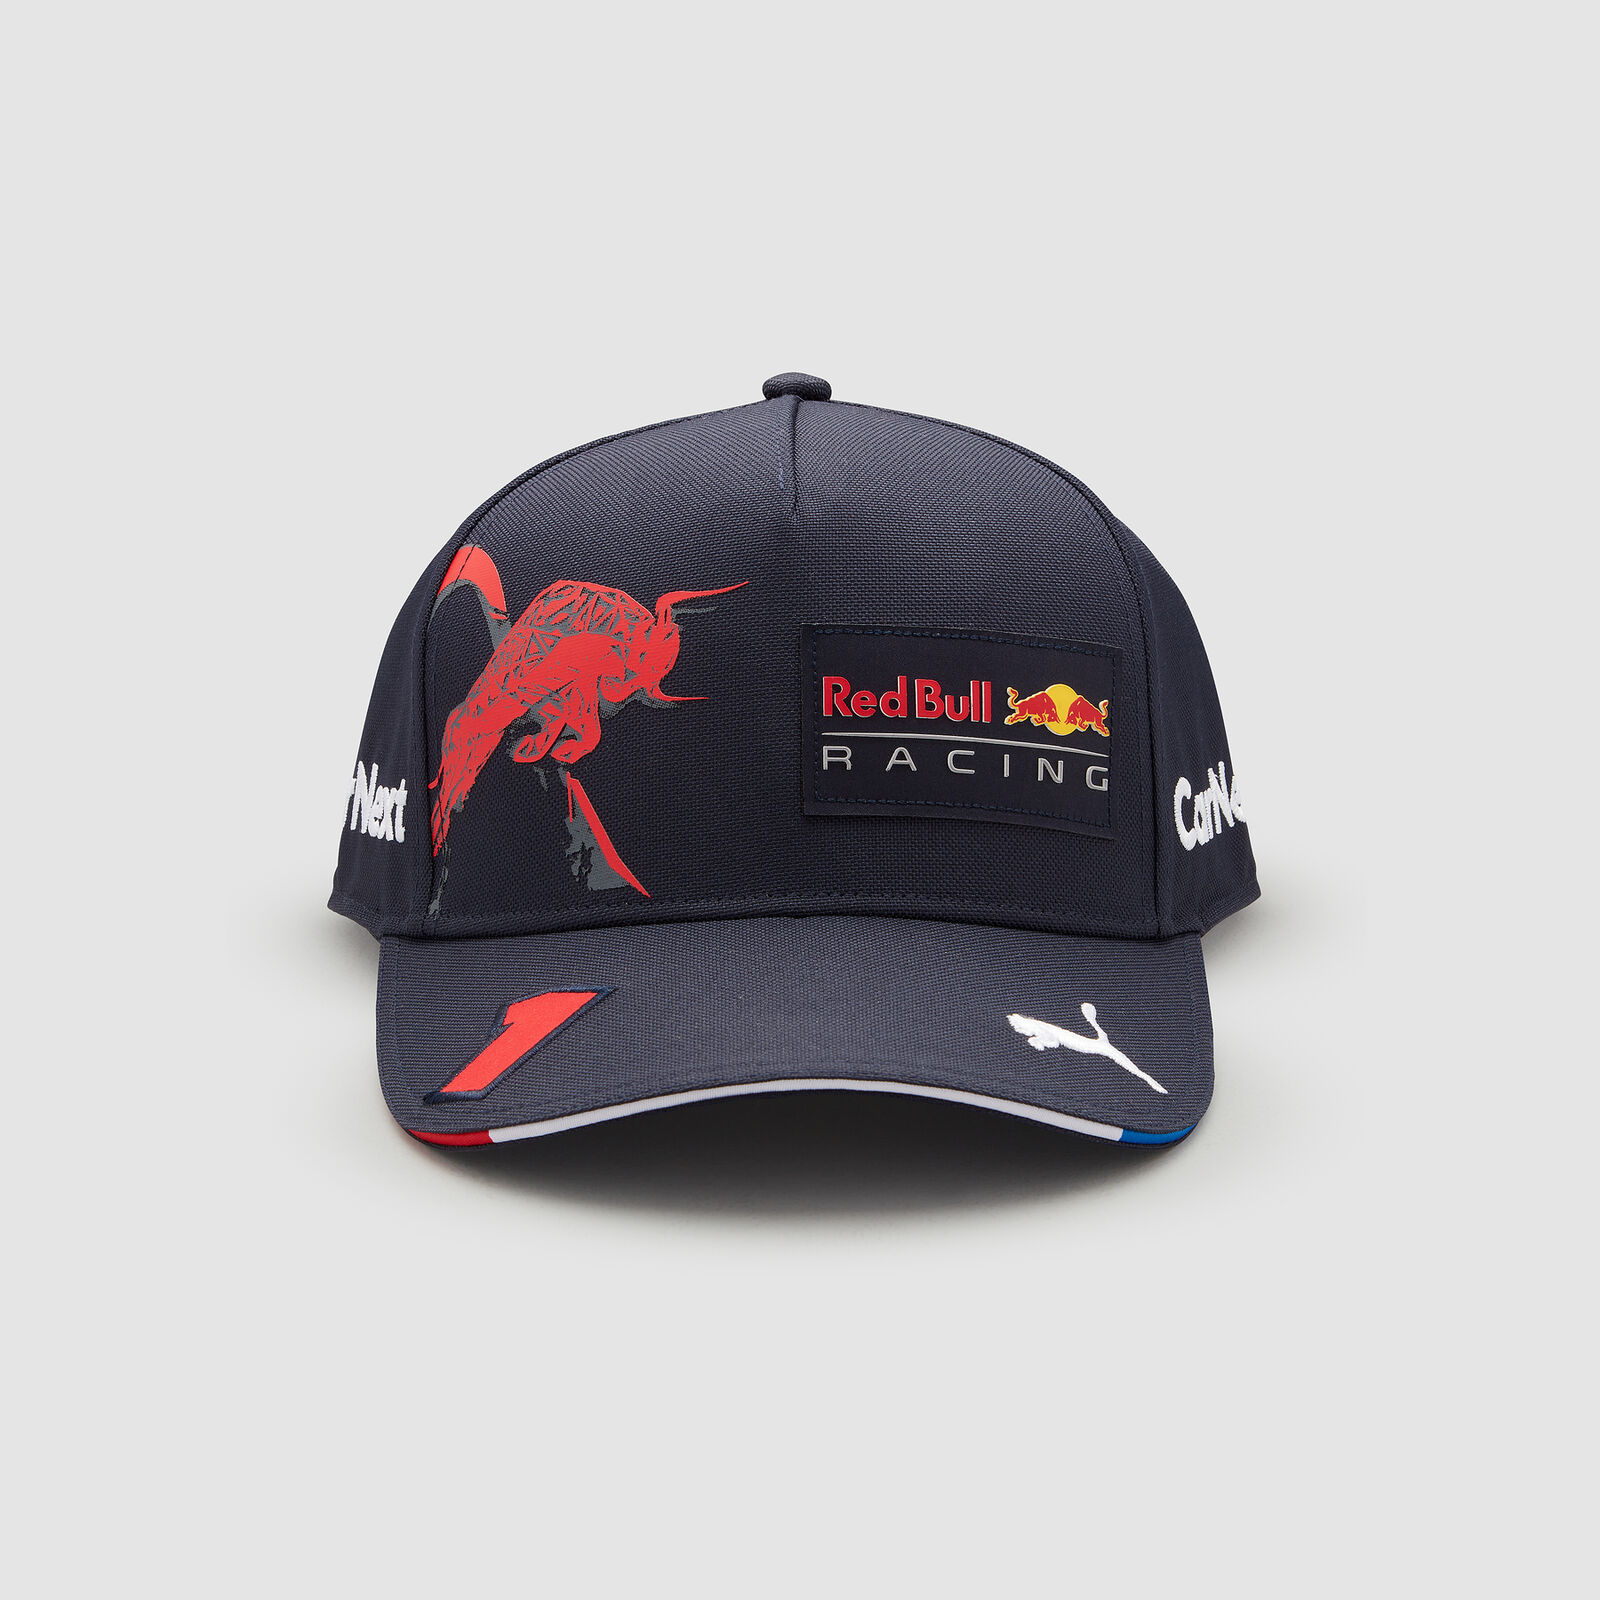 sort Climatic mountains brush Max Verstappen 2022 Team Hat - Red Bull Racing | Fuel For Fans